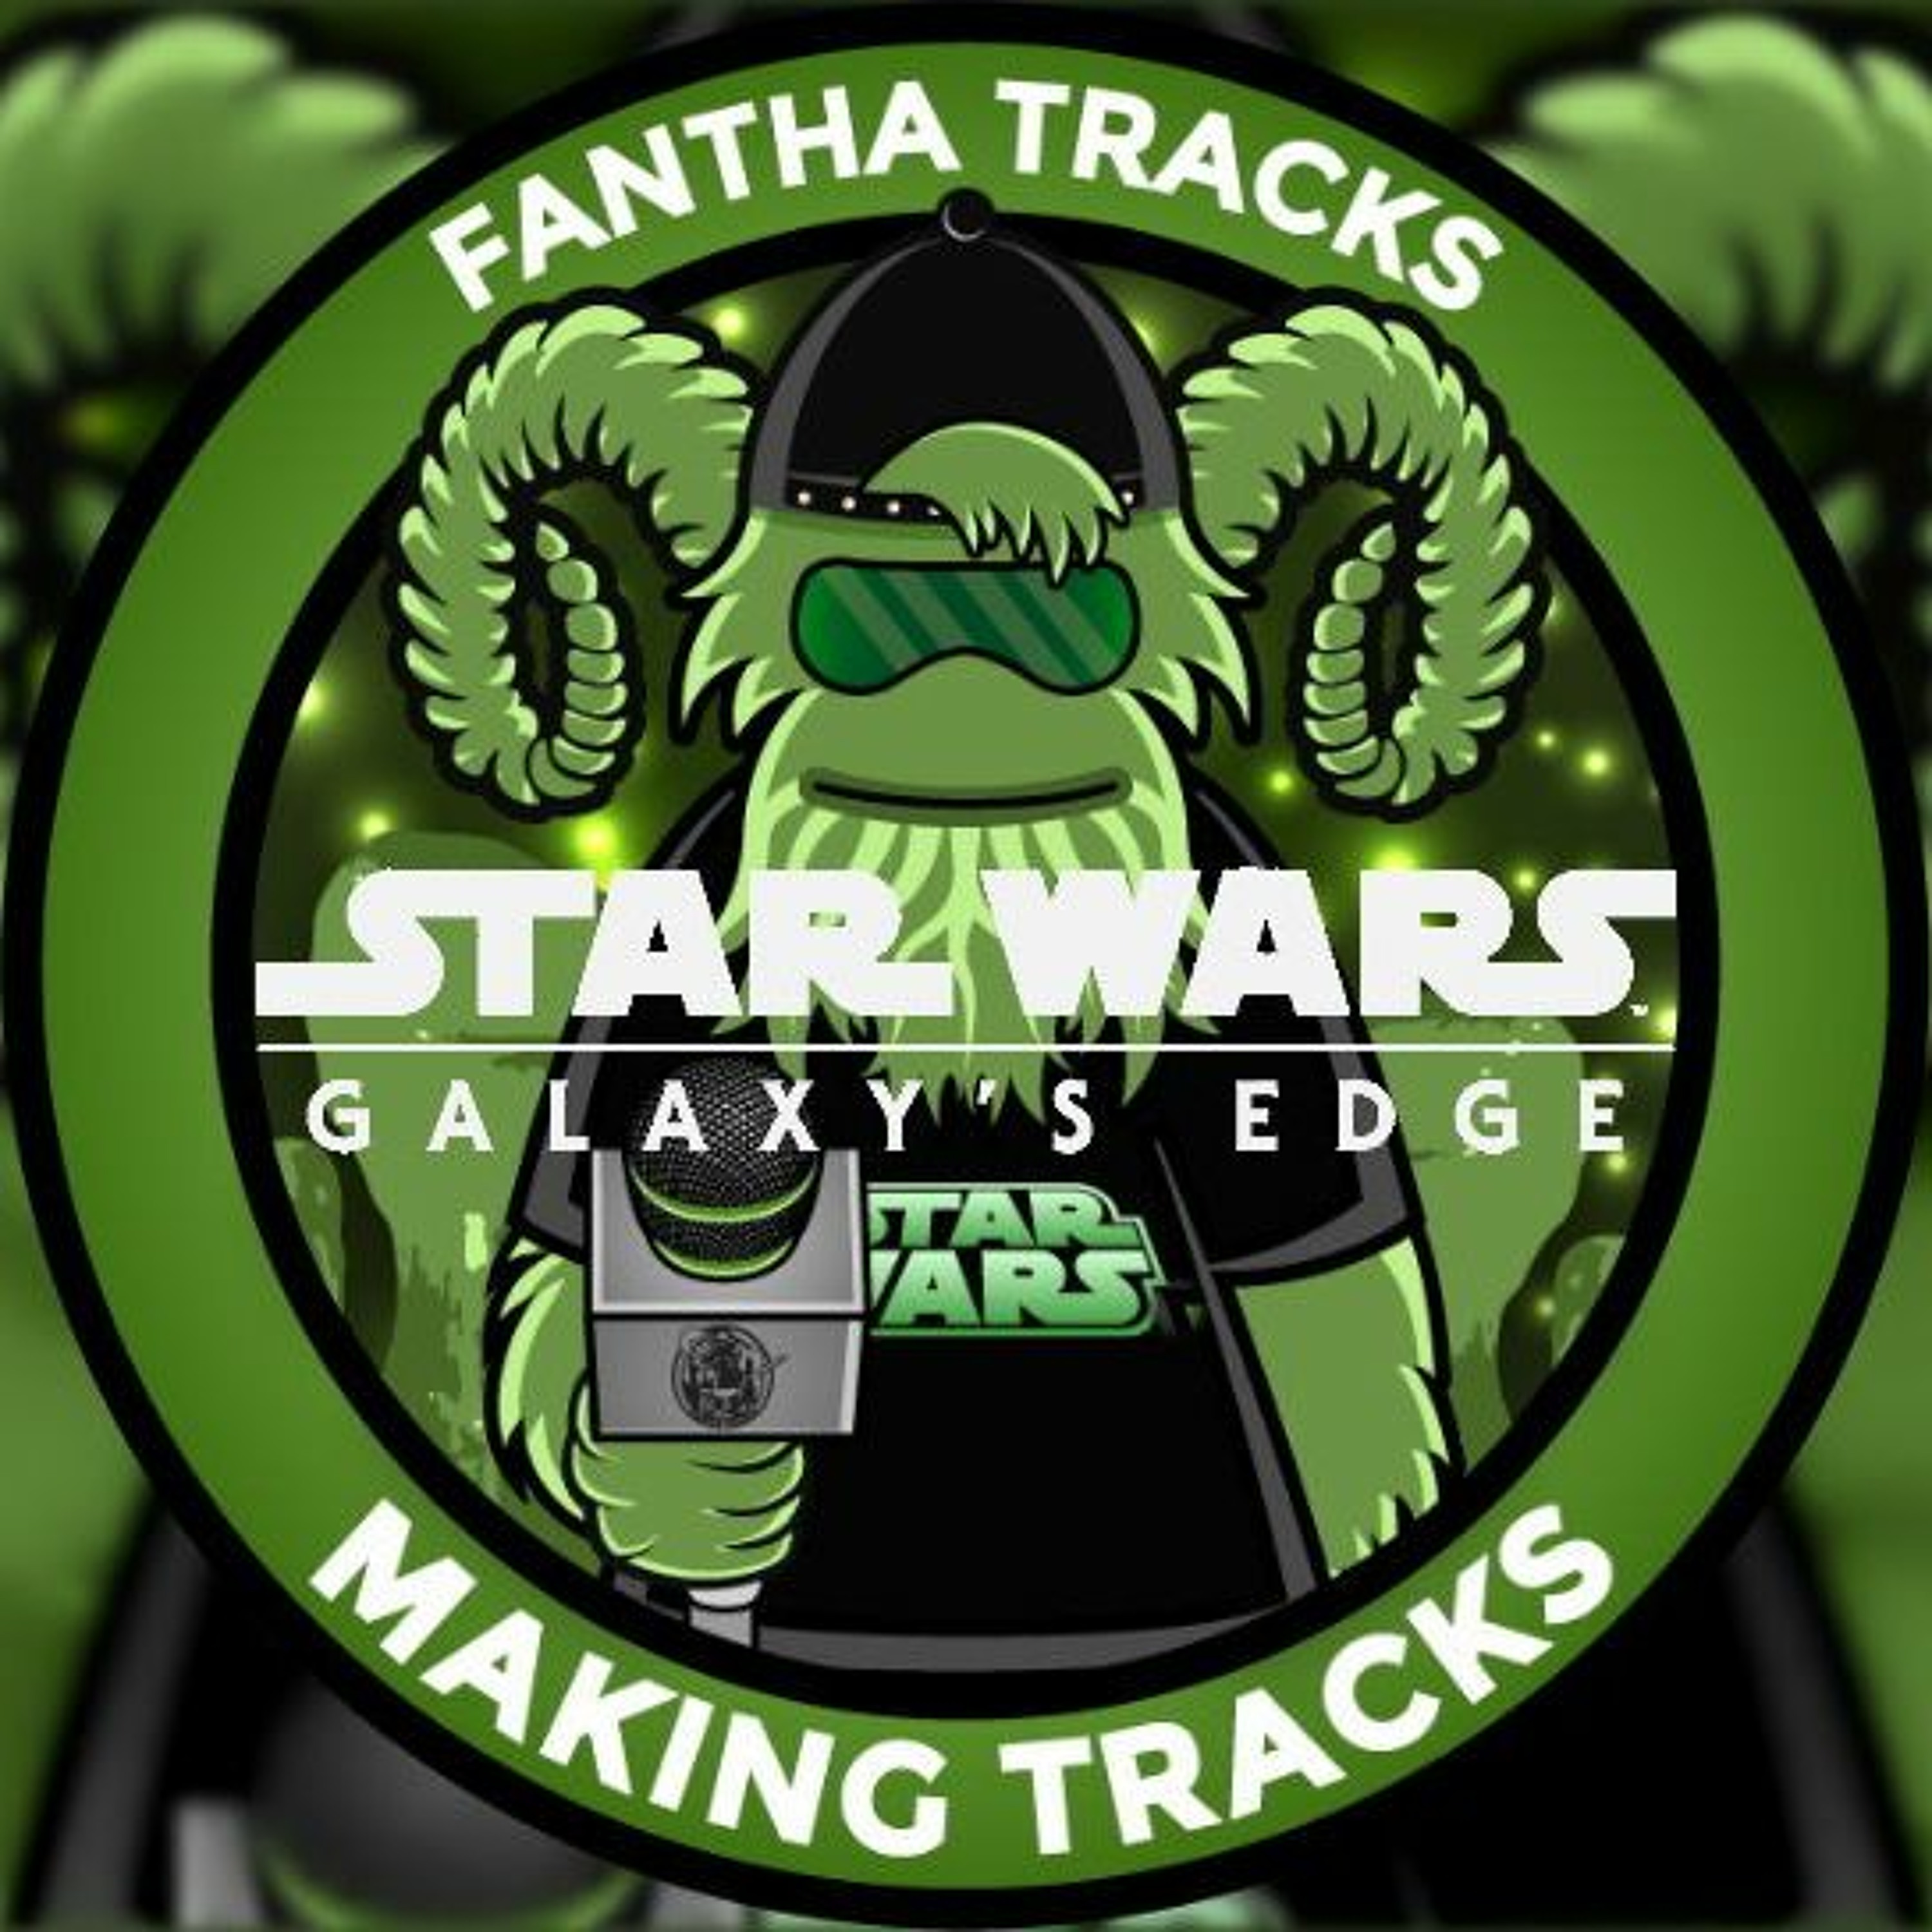 Making Tracks: Galaxy’s Edge with Amy Ratcliffe